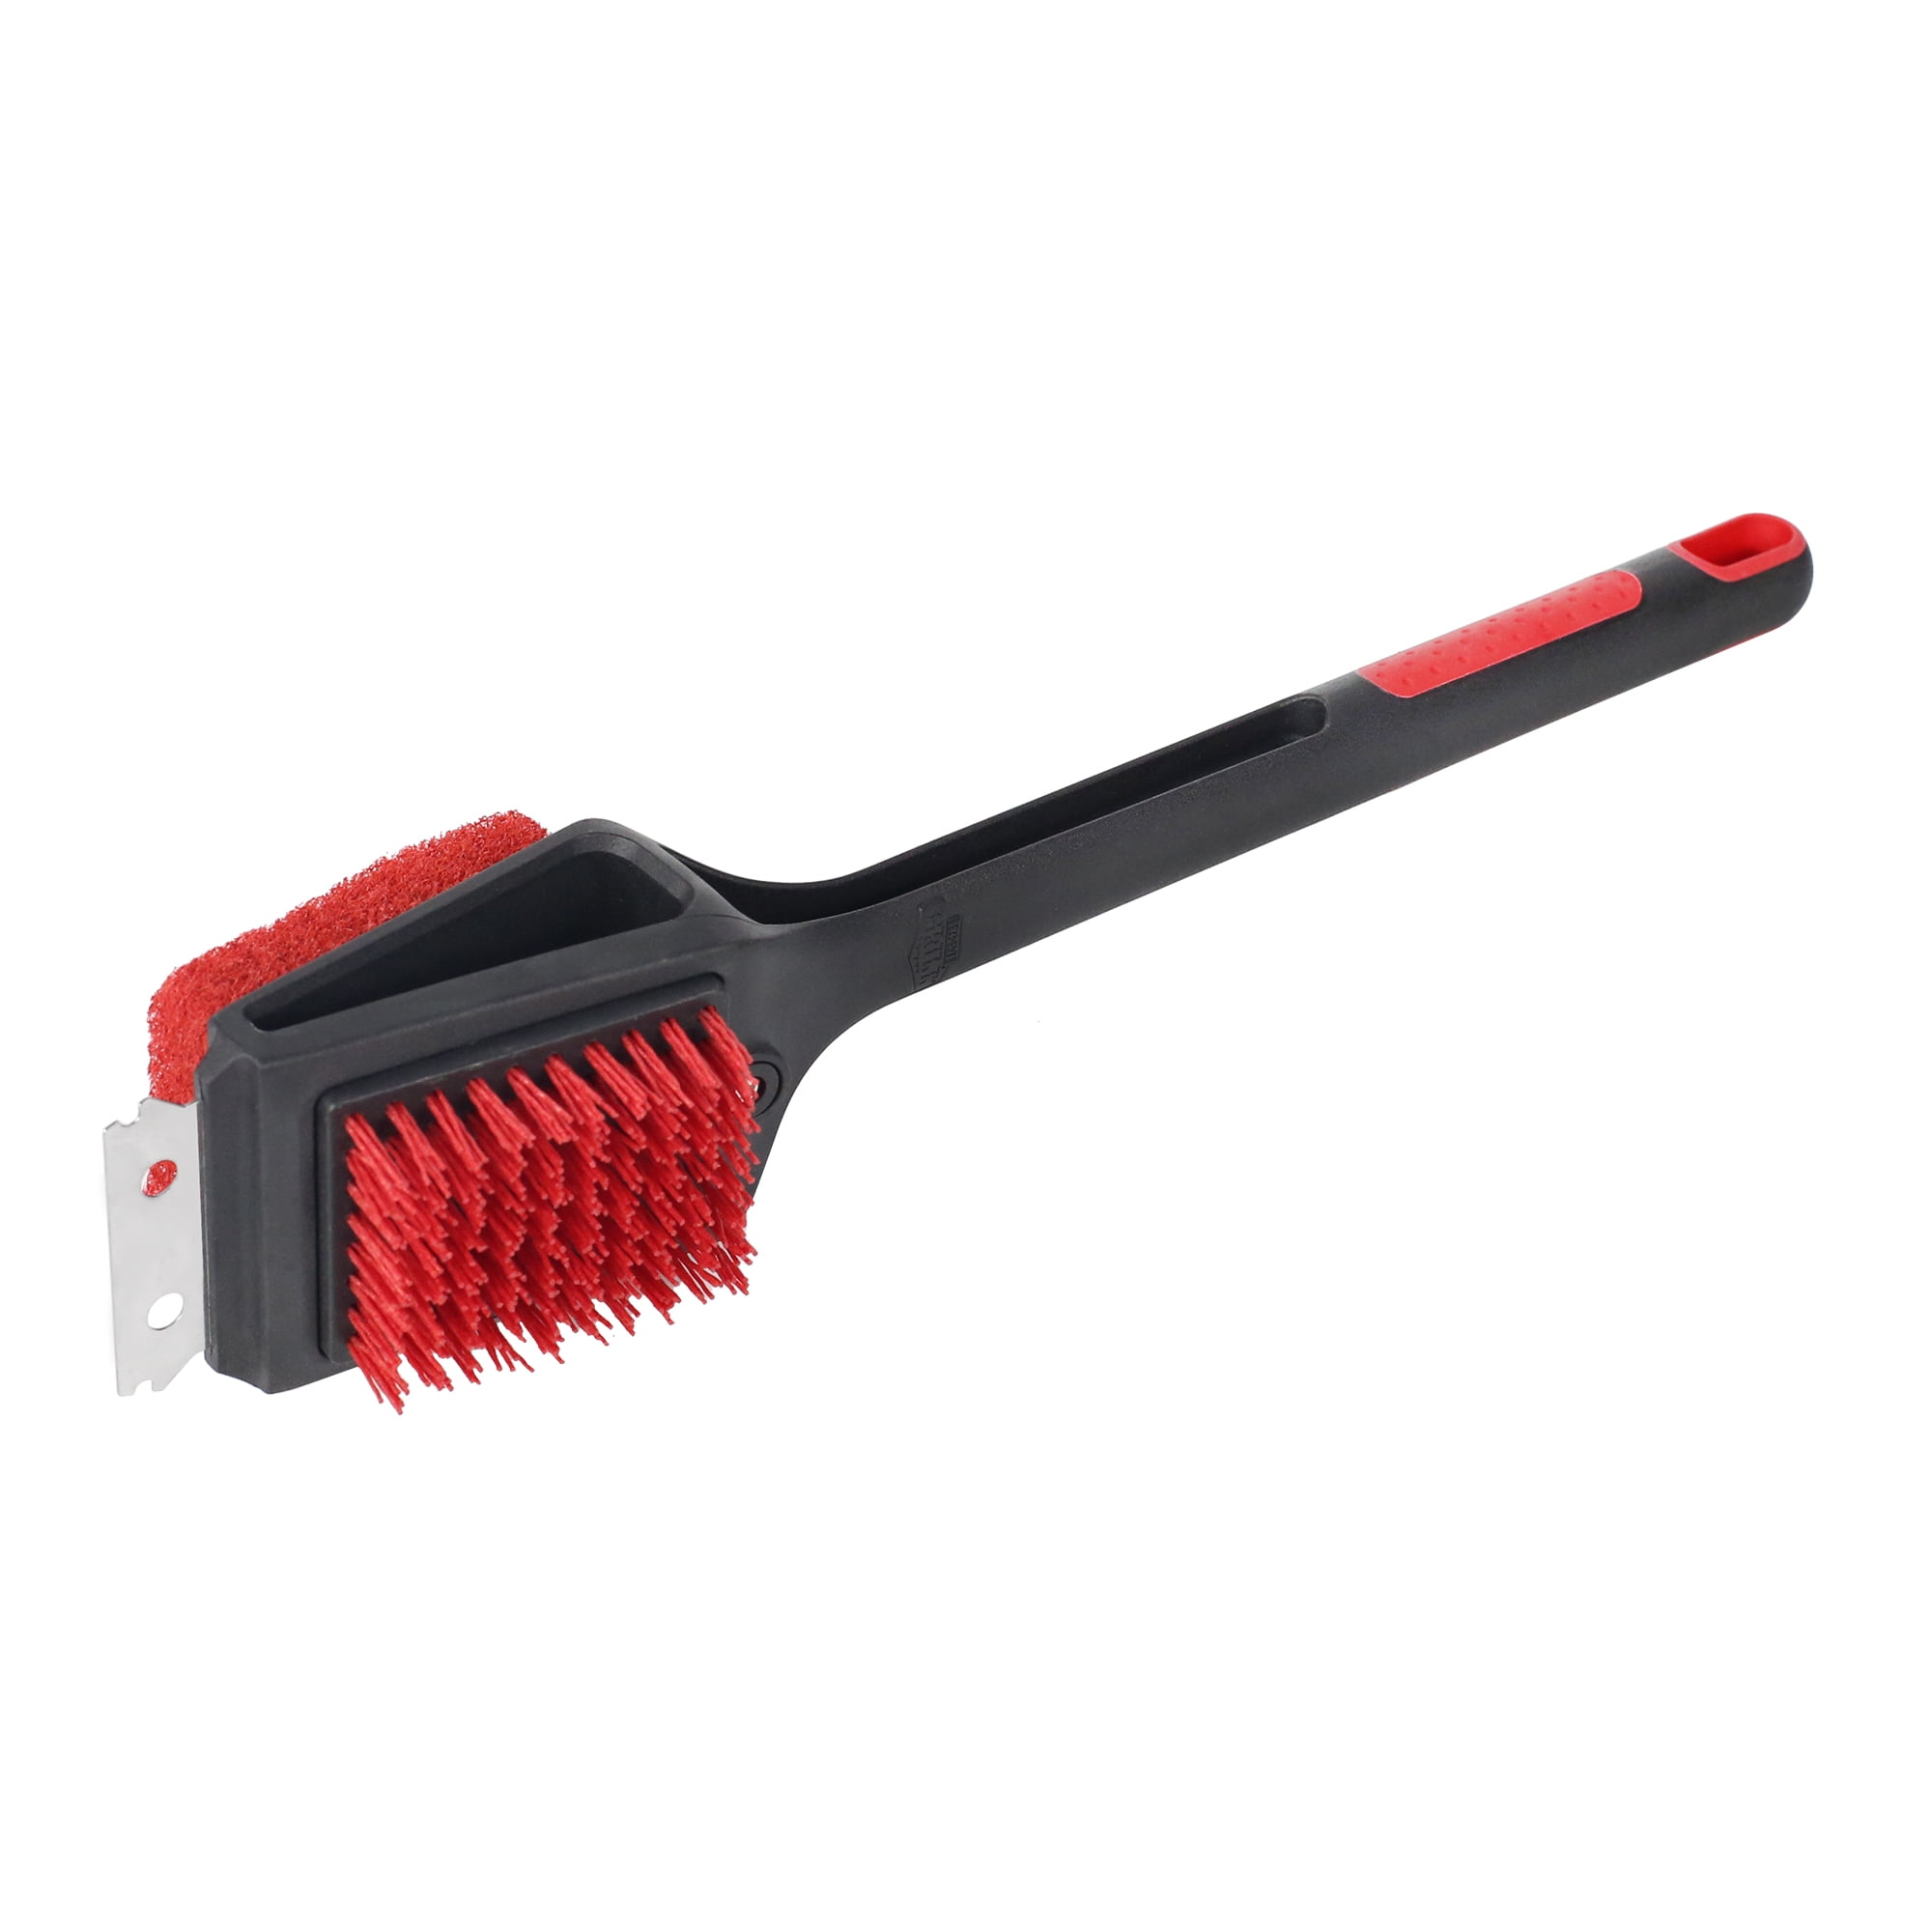 Barbecue Brush-Barbecue Grill Brush-BBQ Brush Upgrade Barbecue Cleaner,18’’ Handle,Safe BBQ Grill Black Cleaning Brush with Scraper 